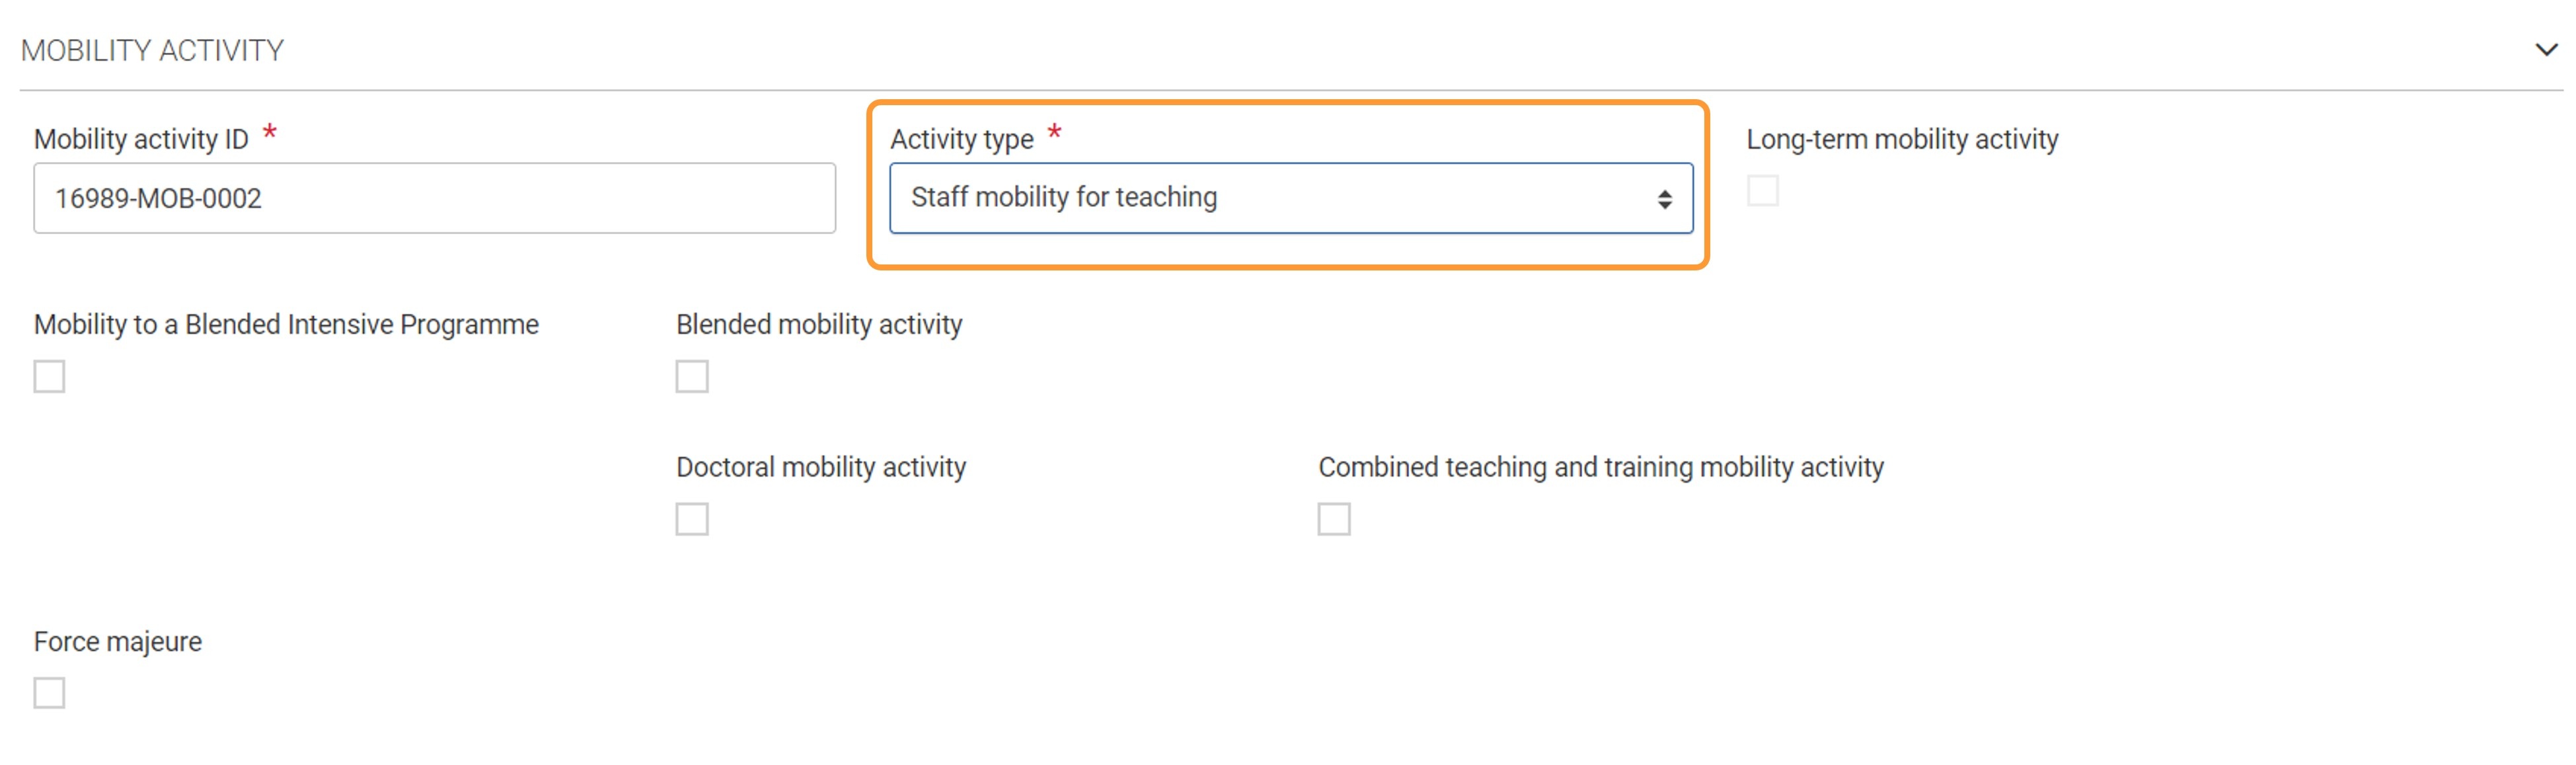 Mobility Activity section including the flags available for a Staff mobility for teaching in a call 2022 project